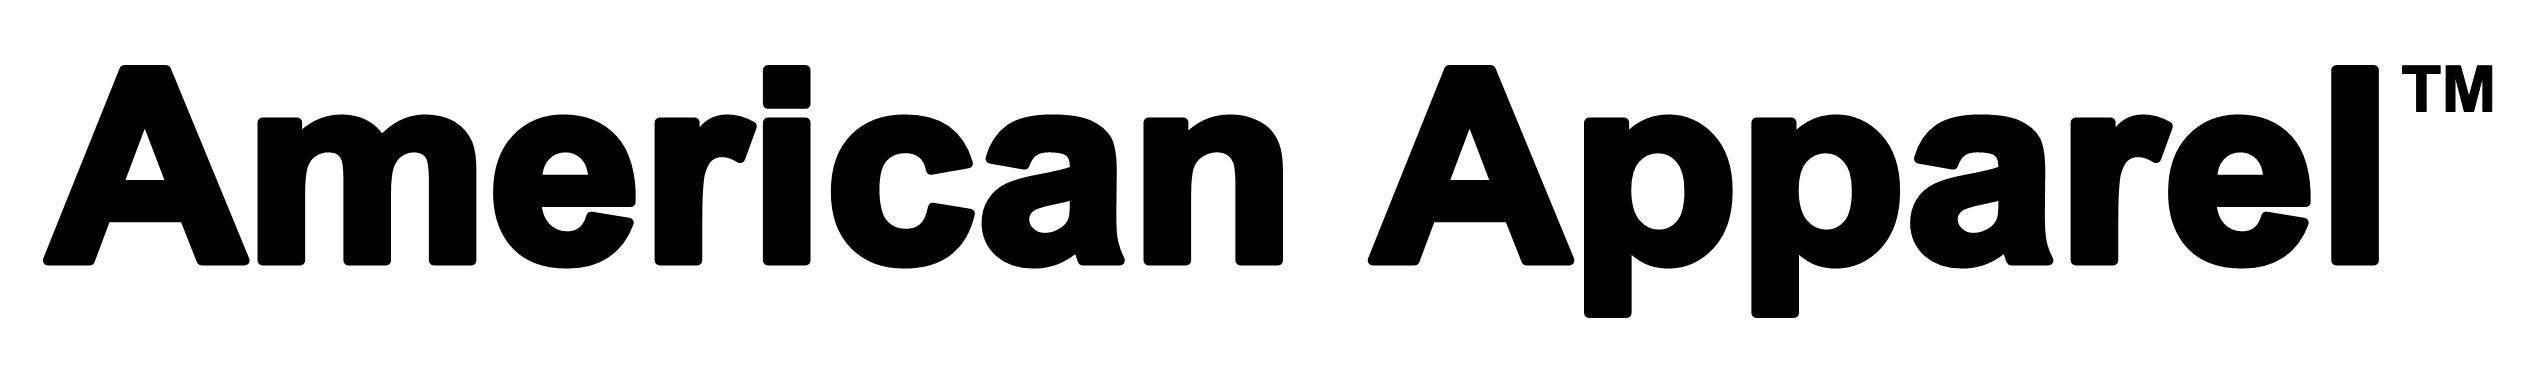 American Apparel Brand Logo - Concerned About American Apparel? We're Here To Help